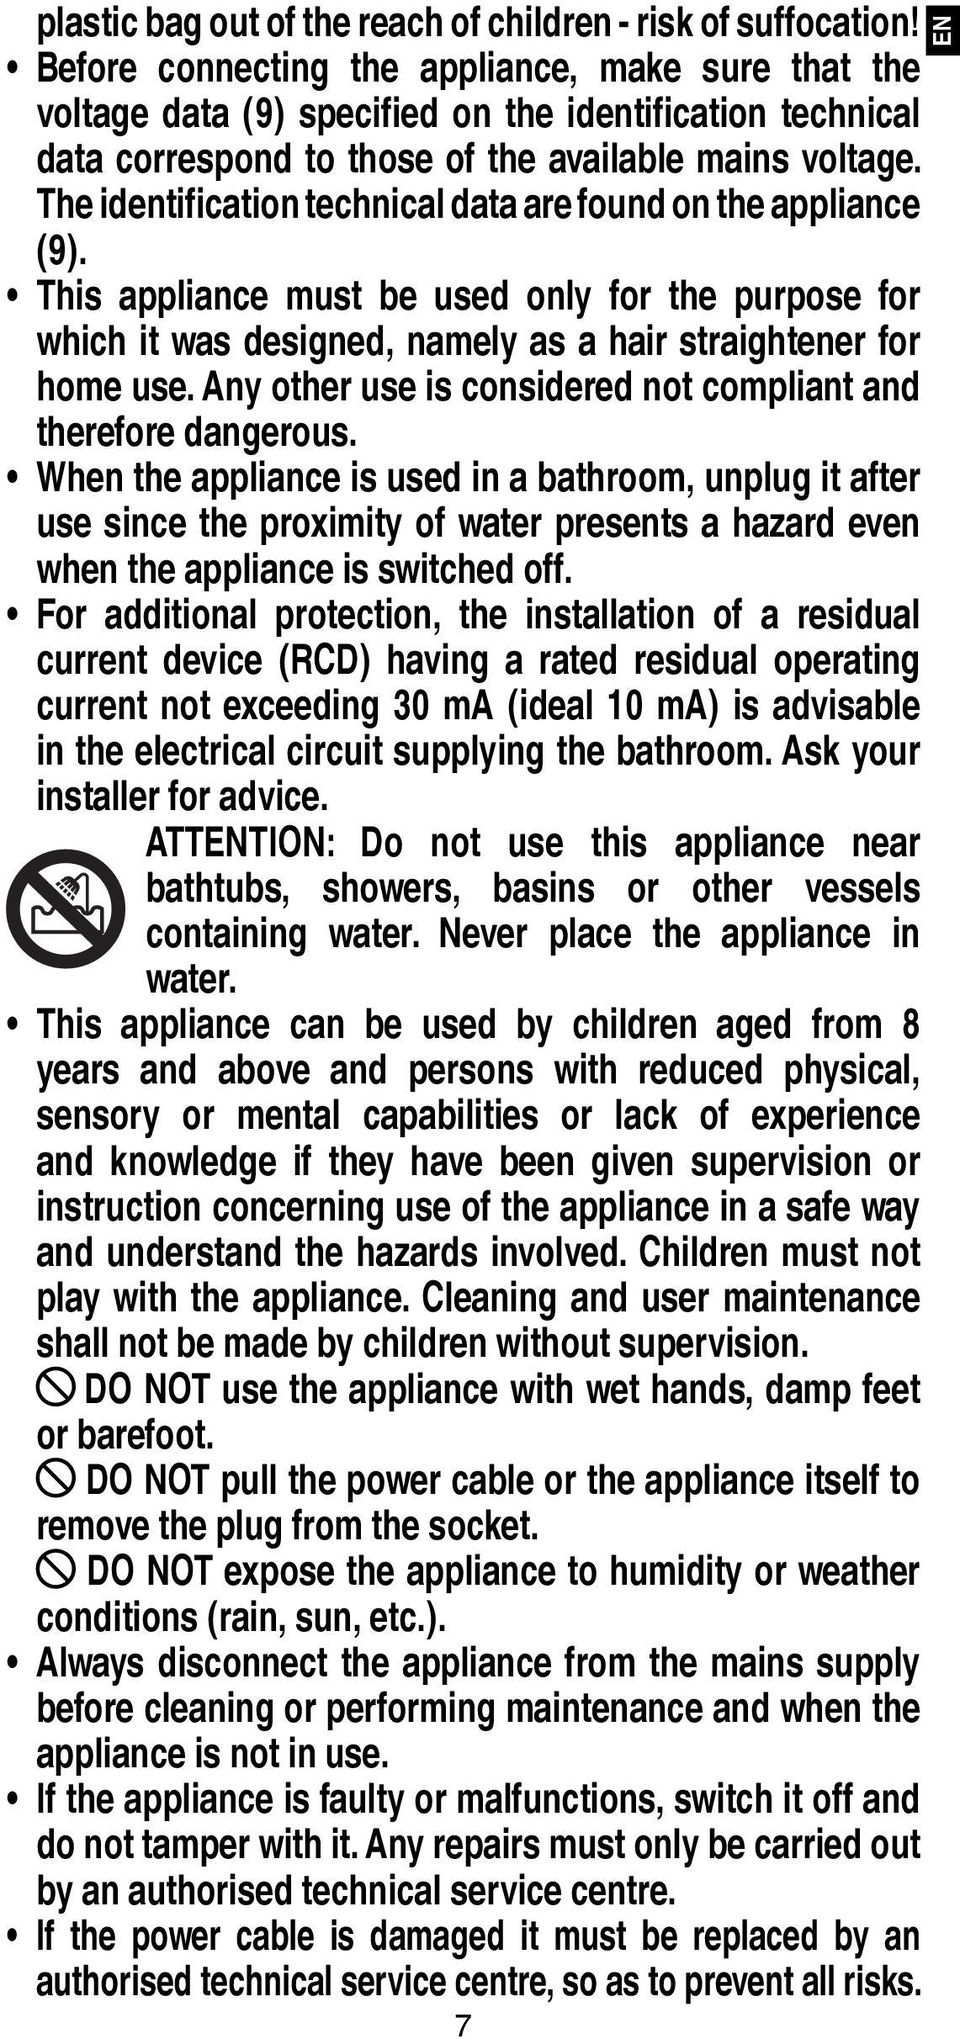 The identification technical data are found on the appliance (9). This appliance must be used only for the purpose for which it was designed, namely as a hair straightener for home use.